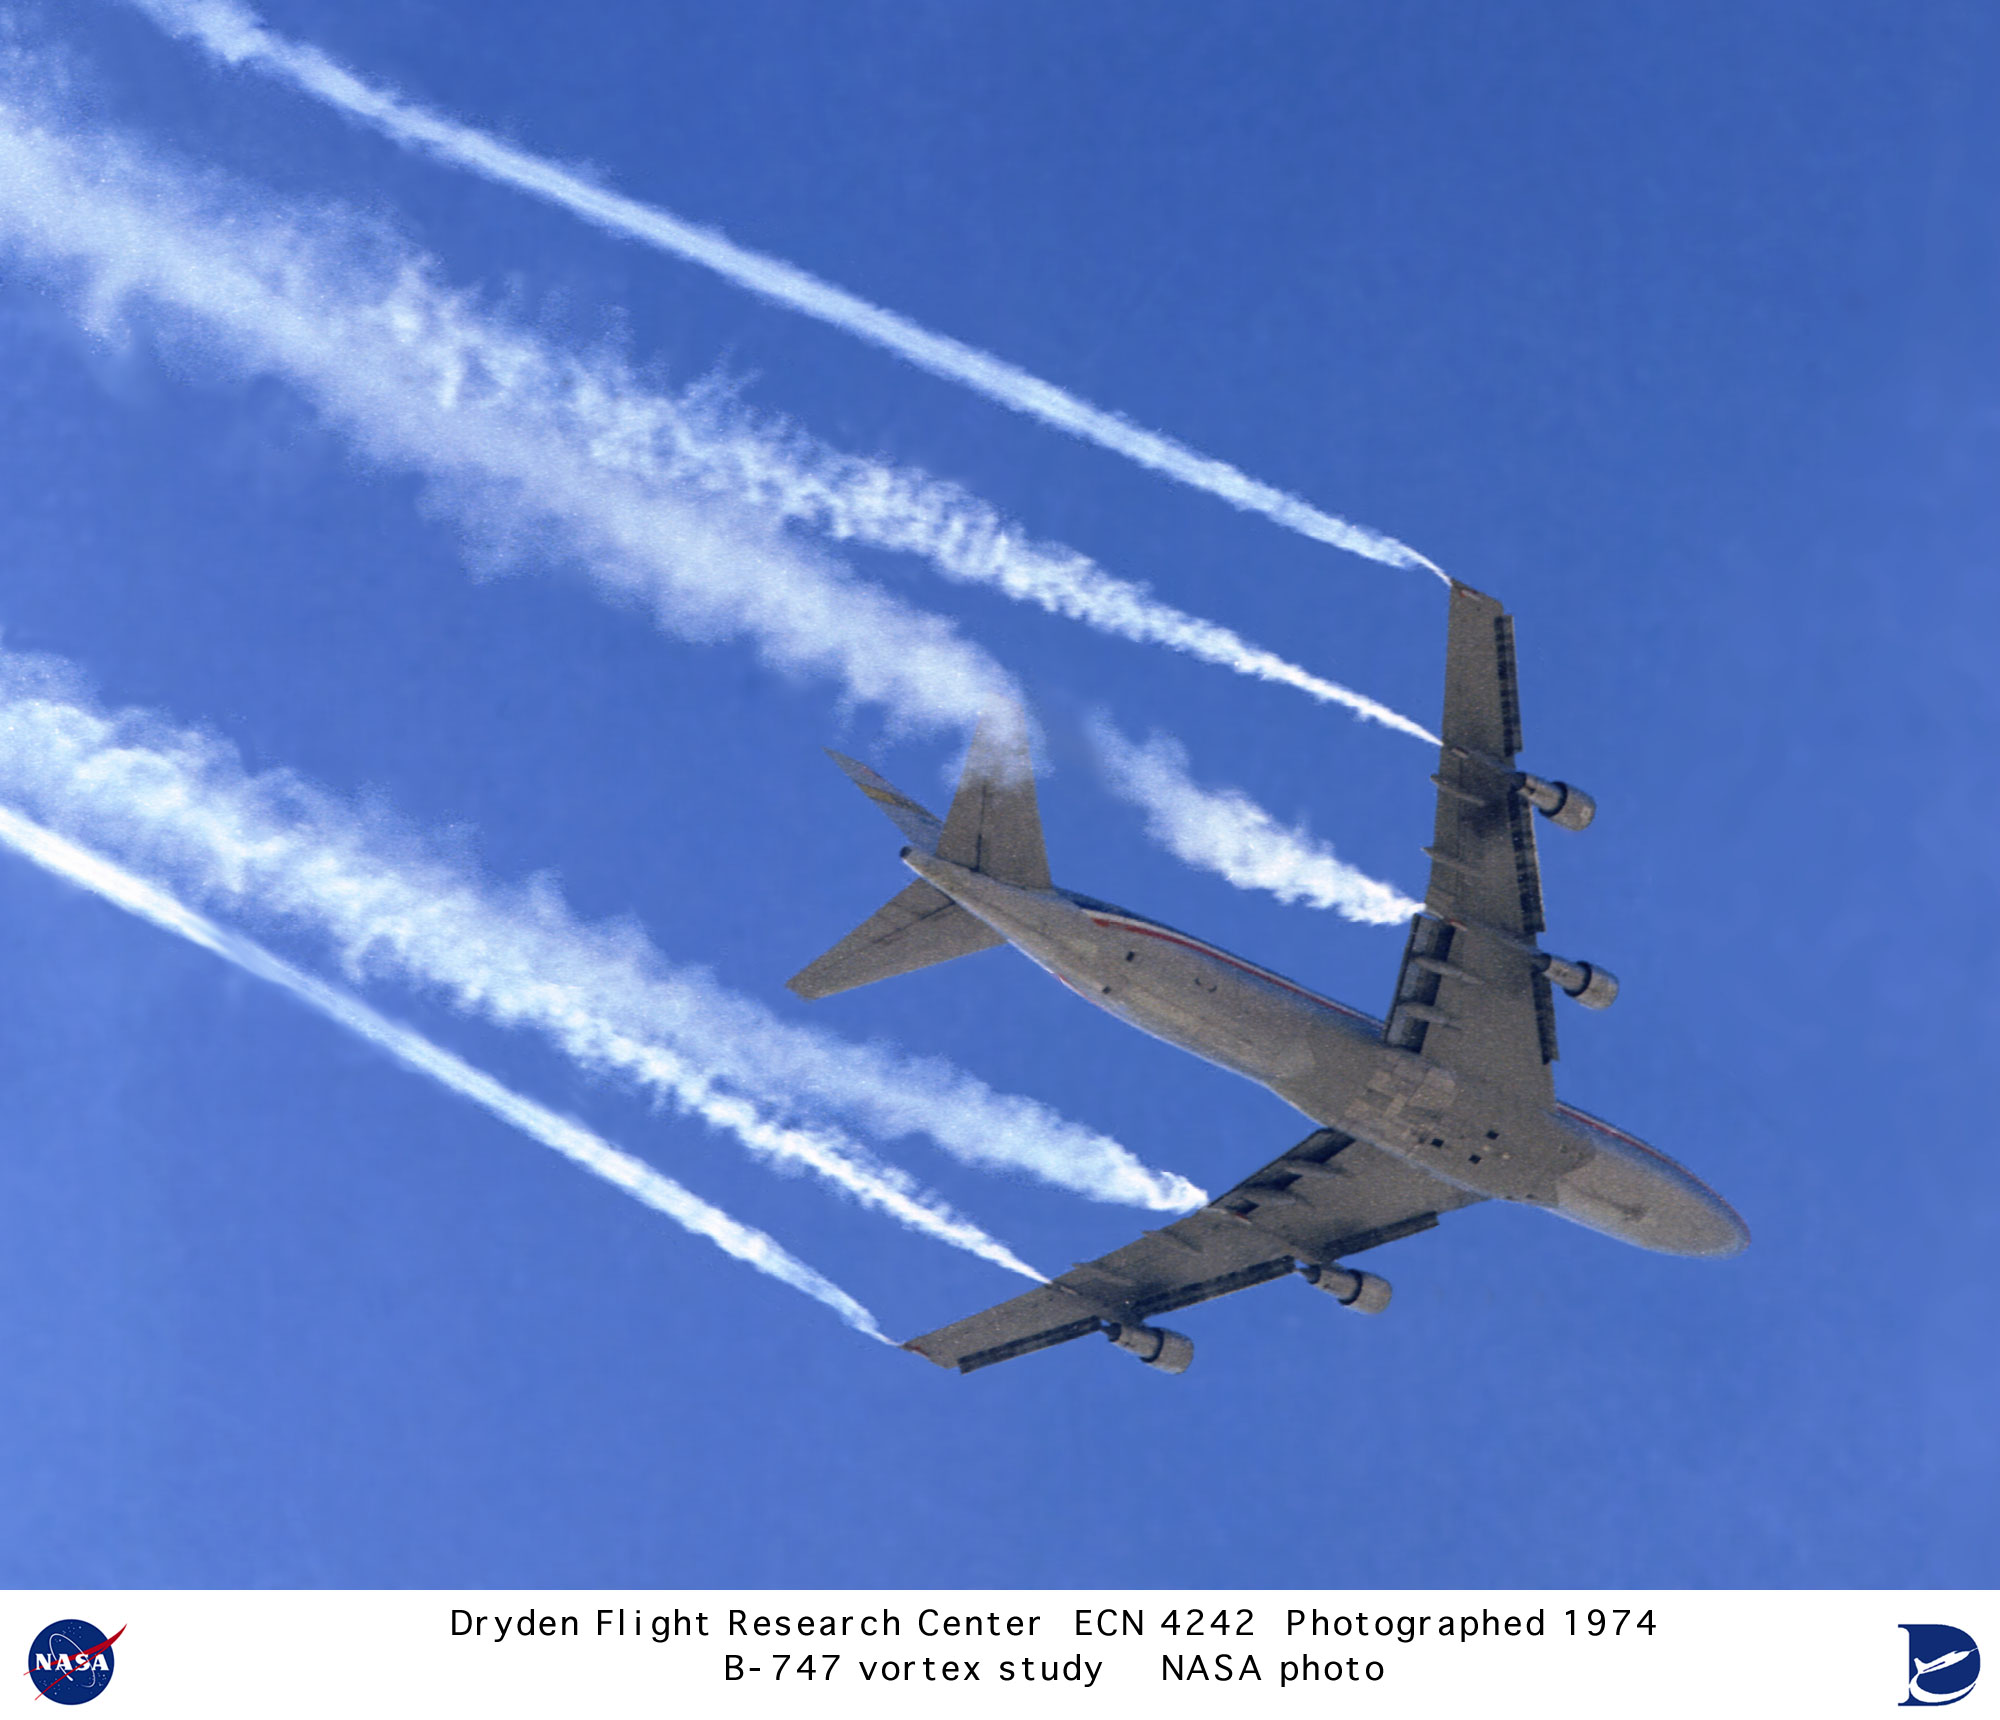 Chemtrails from wing tips